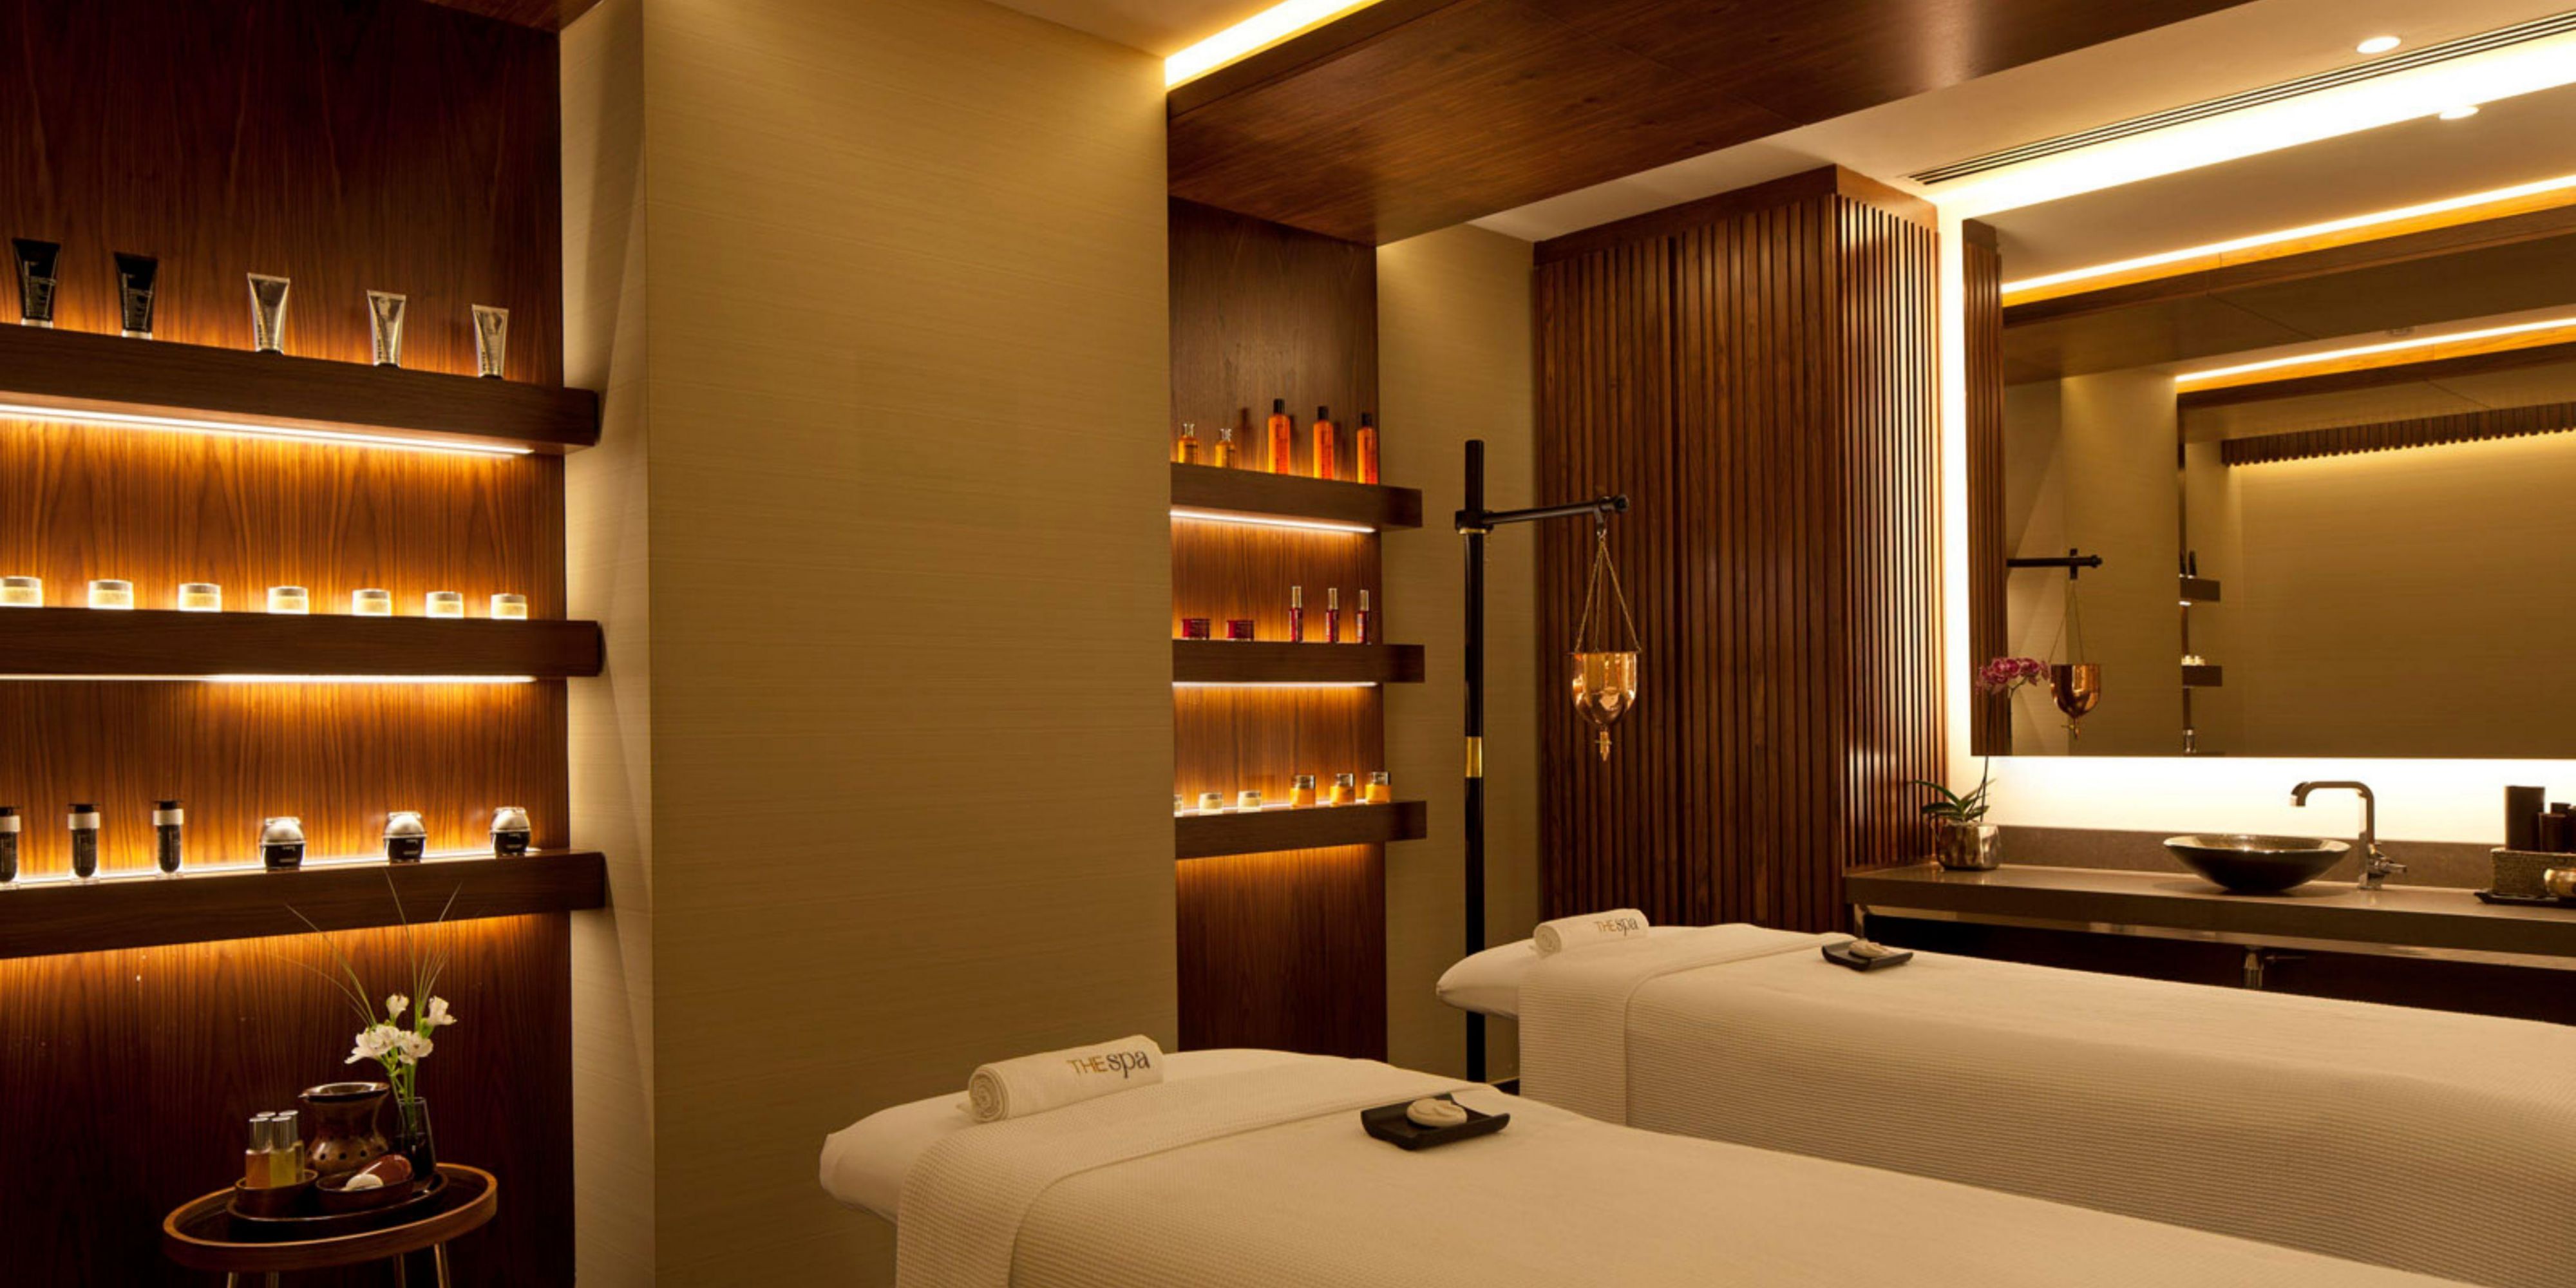 Intimate and serene, THE Spa boasts seven treatment rooms including a luxury couples’ suite, saunas, and a relaxation space. Each treatment in the diverse menu has been selected from world cultures to present you with the finest collection of traditional and innovative experiences. No matter what you choose, the results will be exceptional.